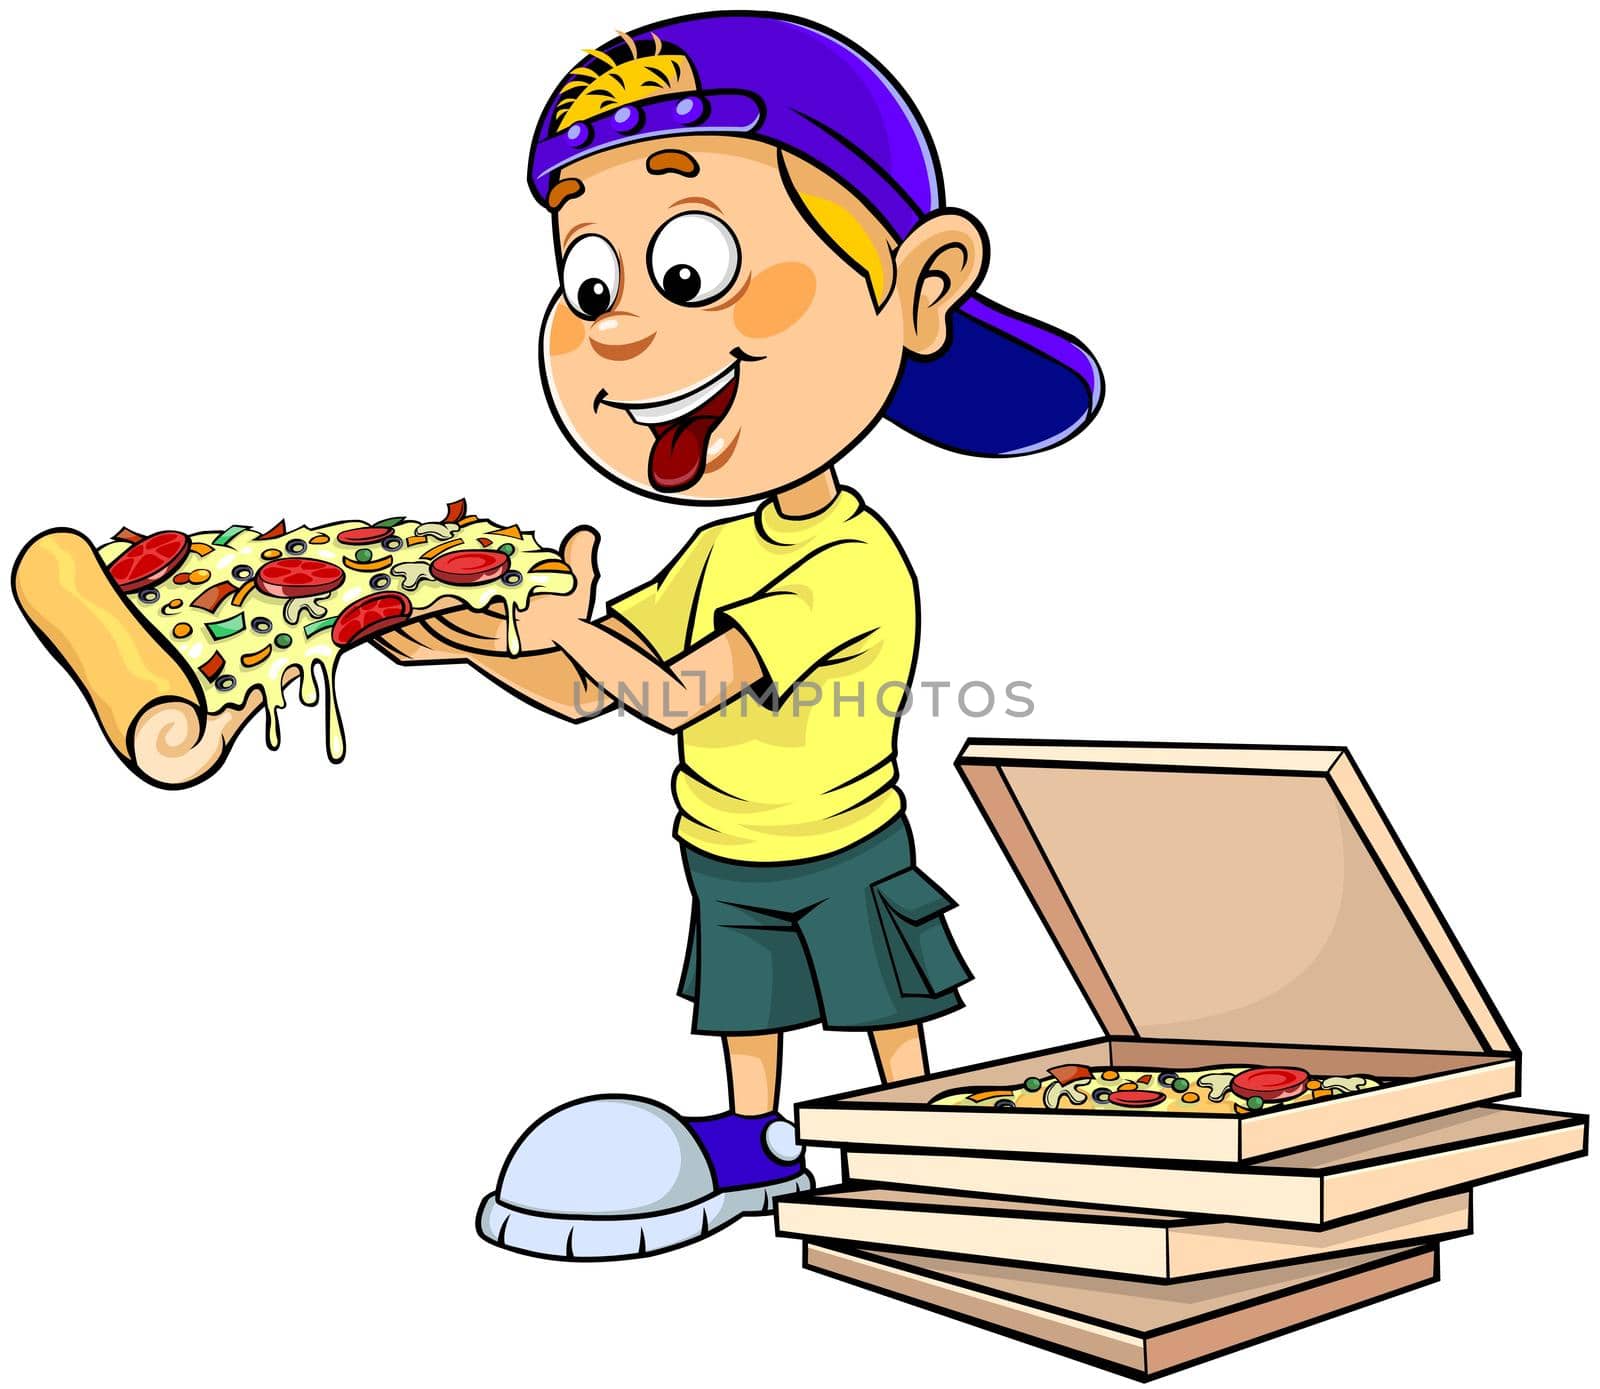 Color illustration of a cartoon boy eating pizza